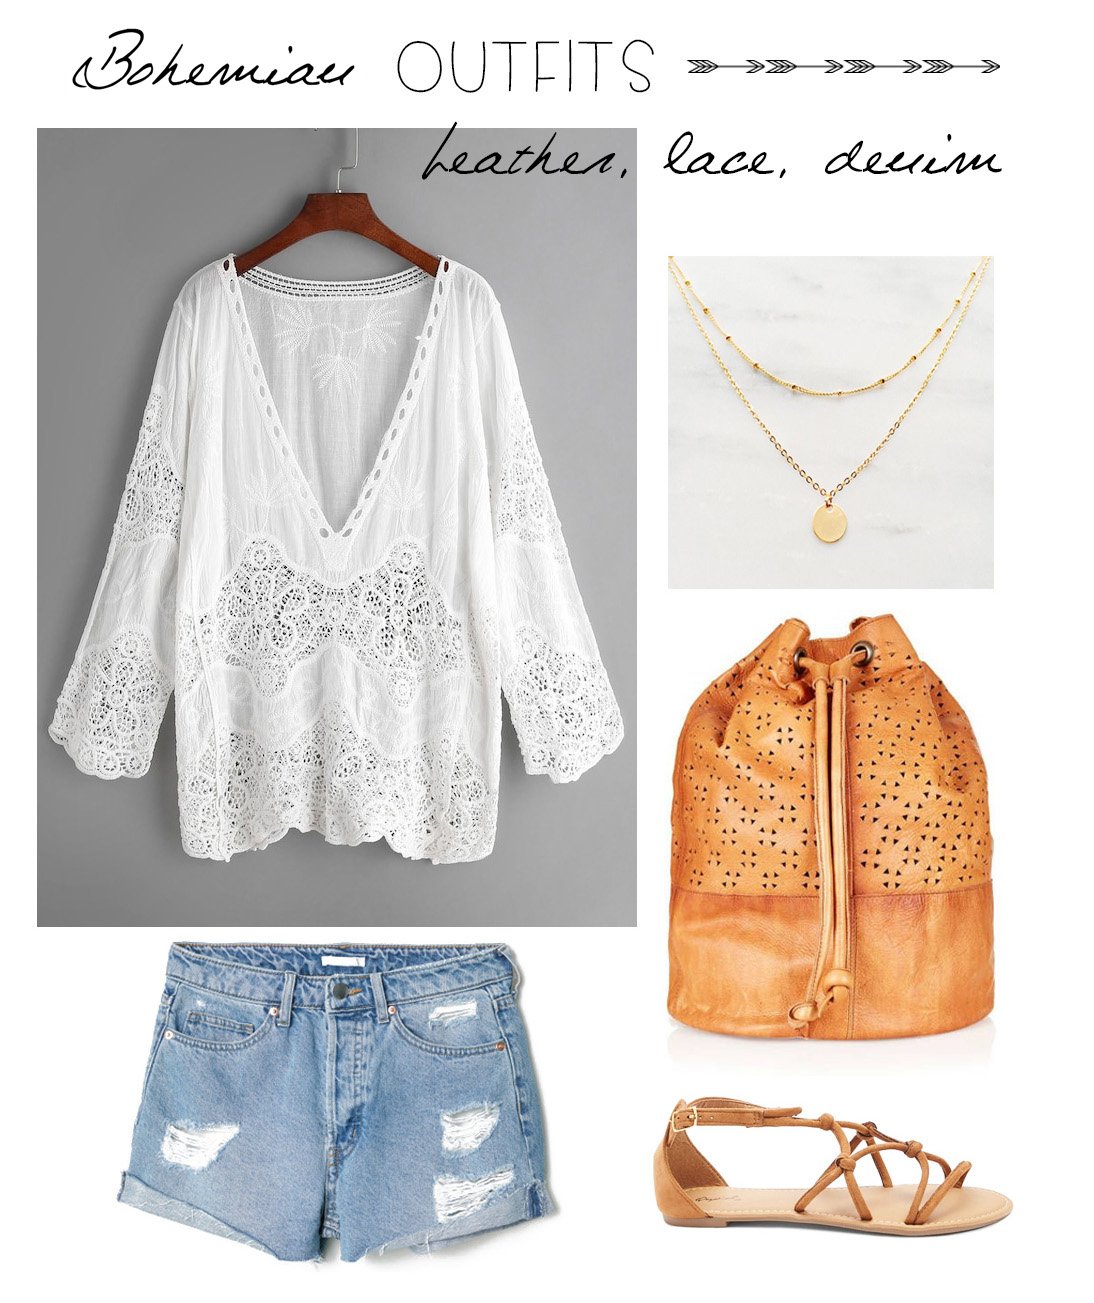 Bohemian Outfit 